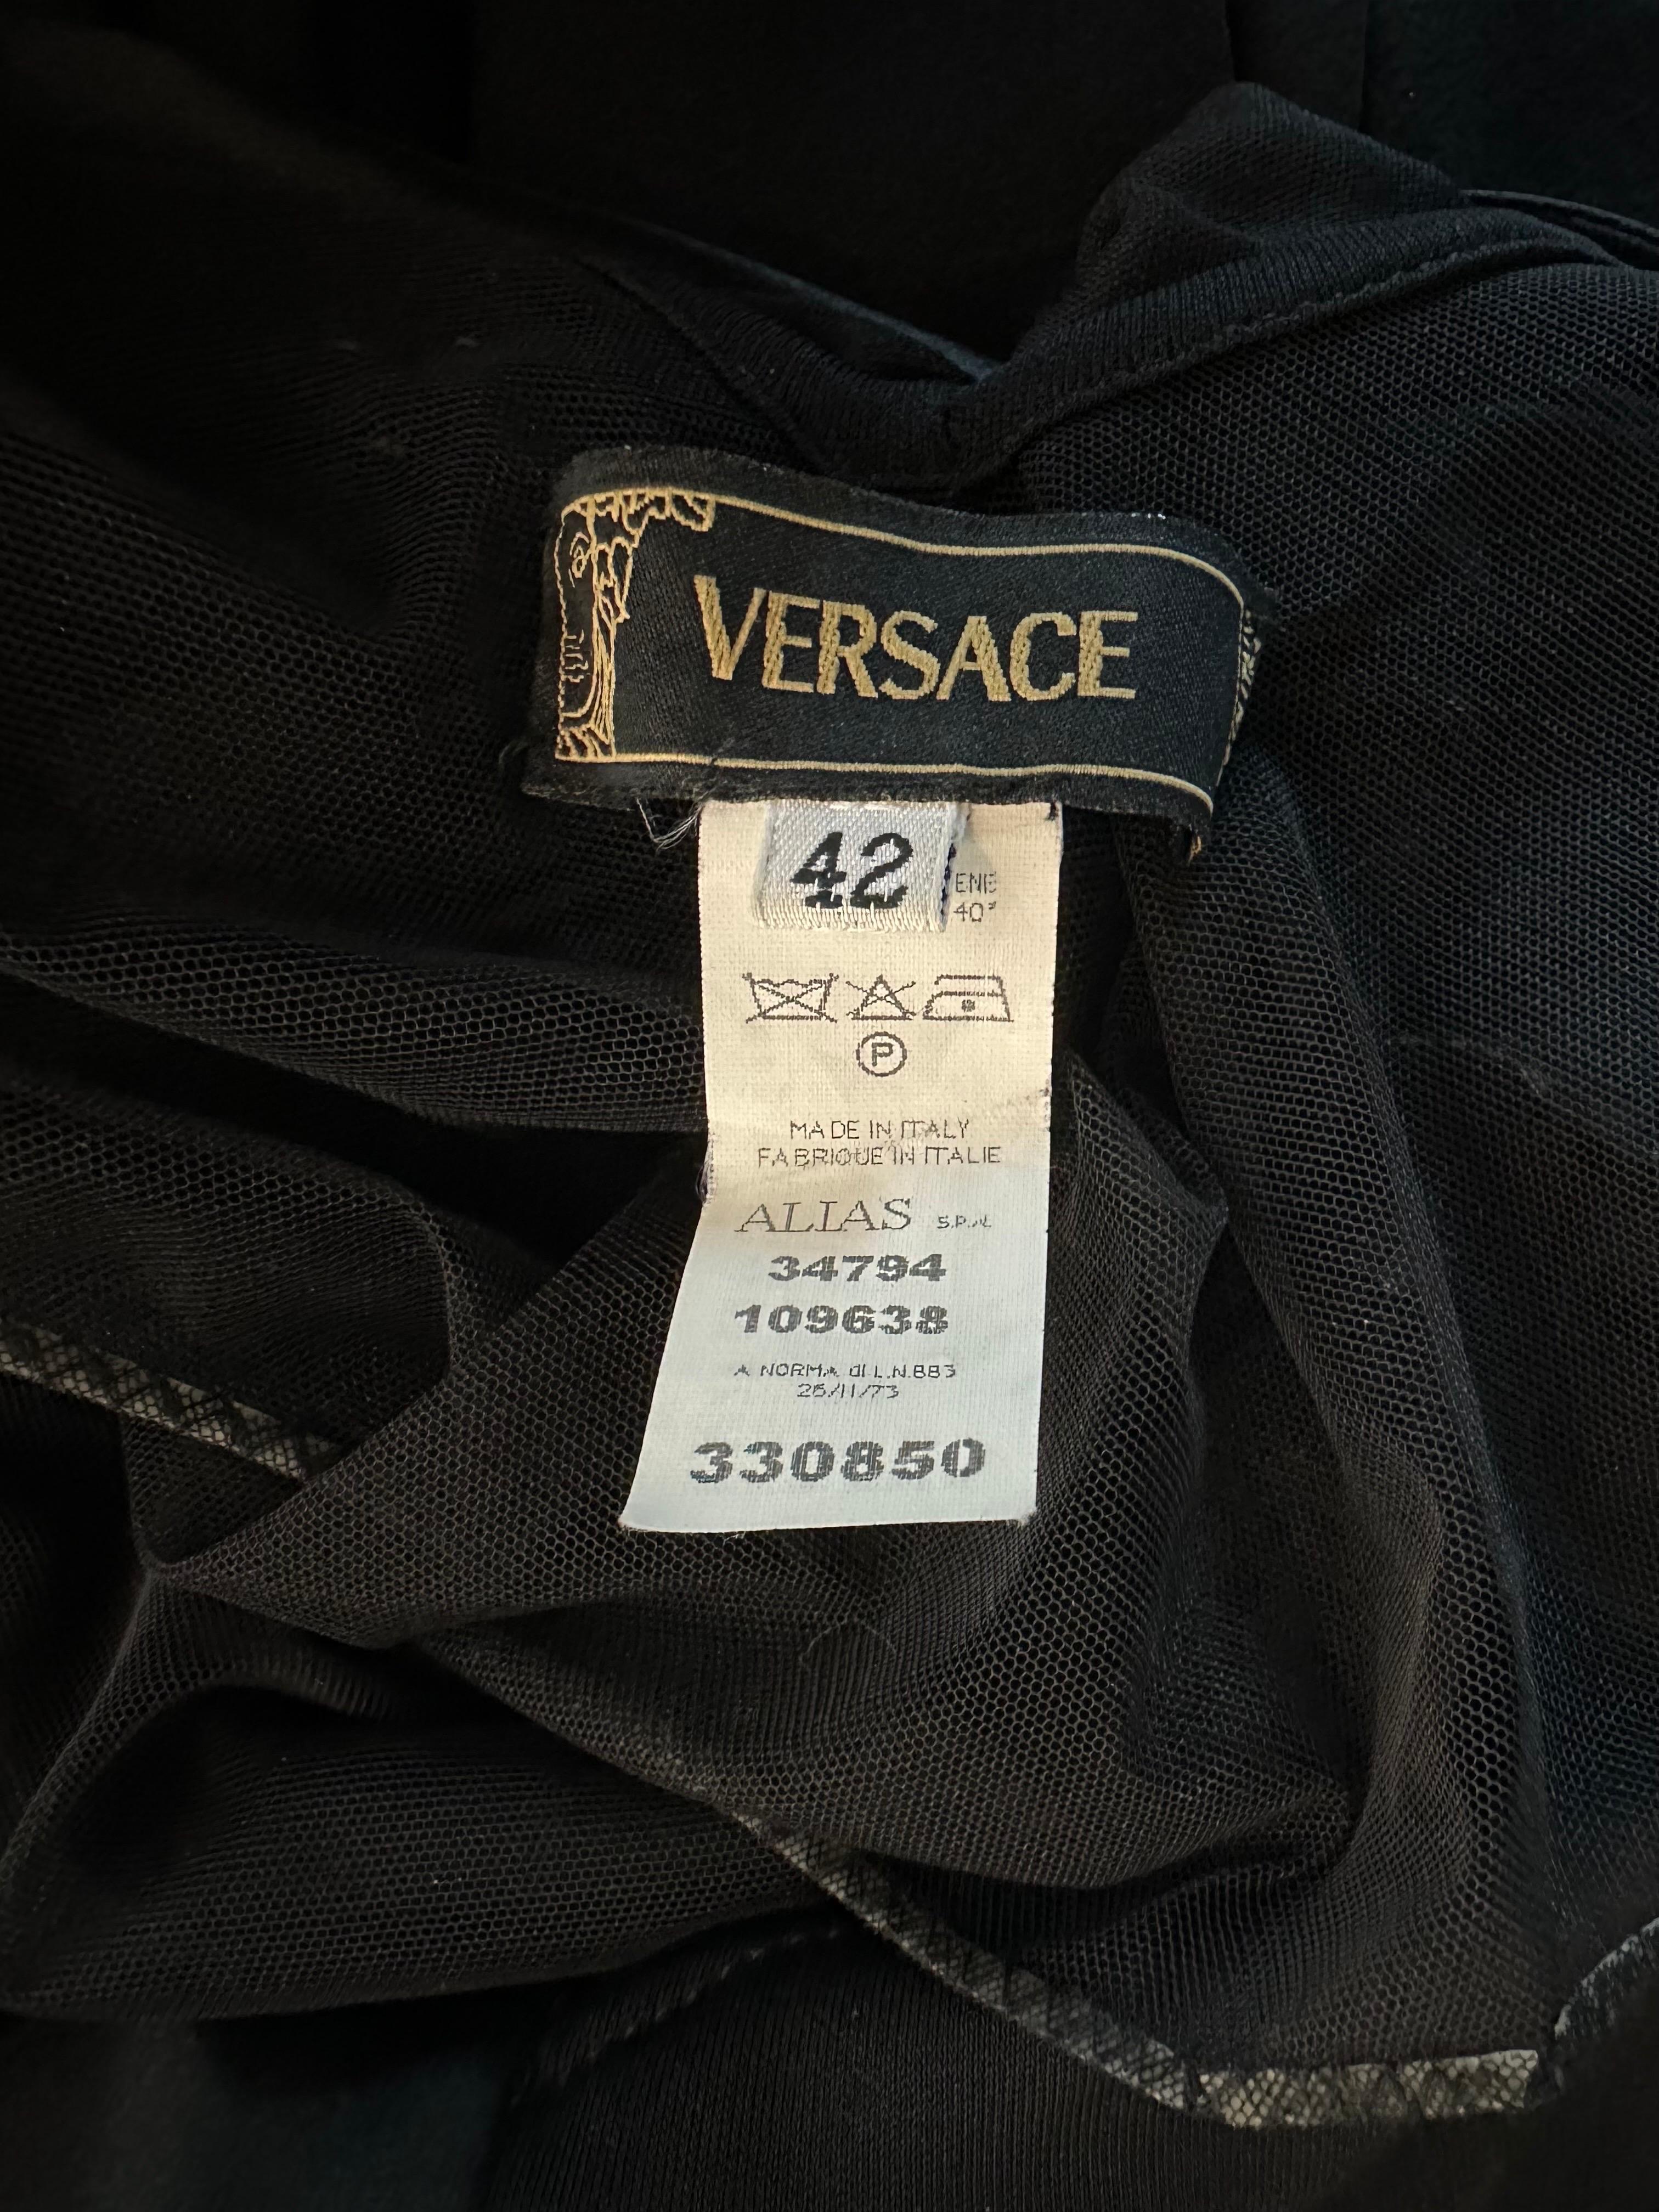 Versace S/S 2004 Plunged Halter Open Back Ruffles Black Evening Dress Gown  For Sale 11